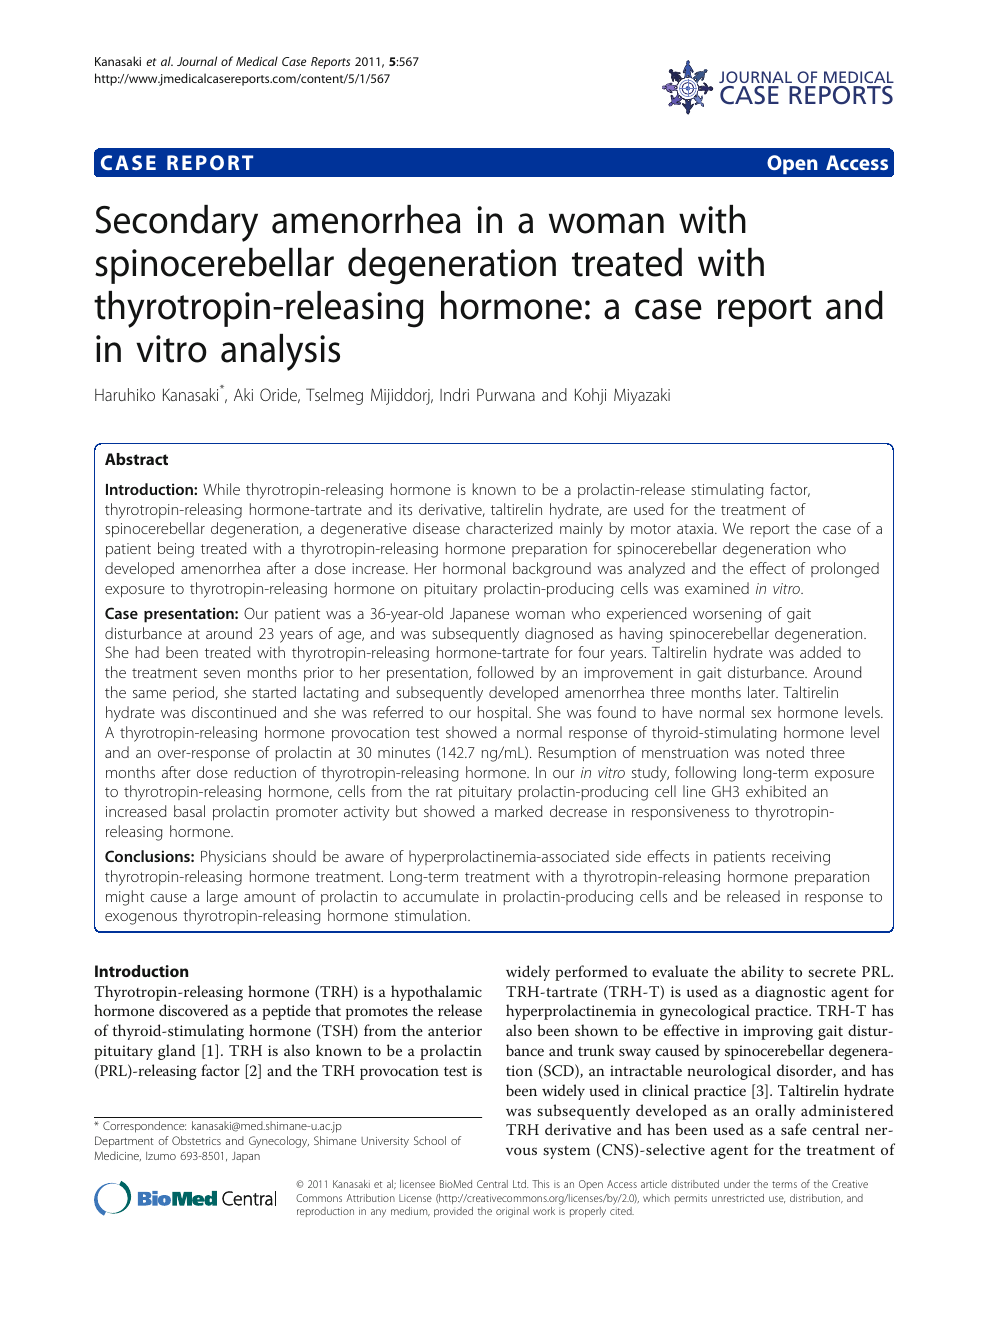 Secondary amenorrhea in a woman with spinocerebellar degeneration treated with thyrotropin-releasing hormone a case report and in vitro analysis